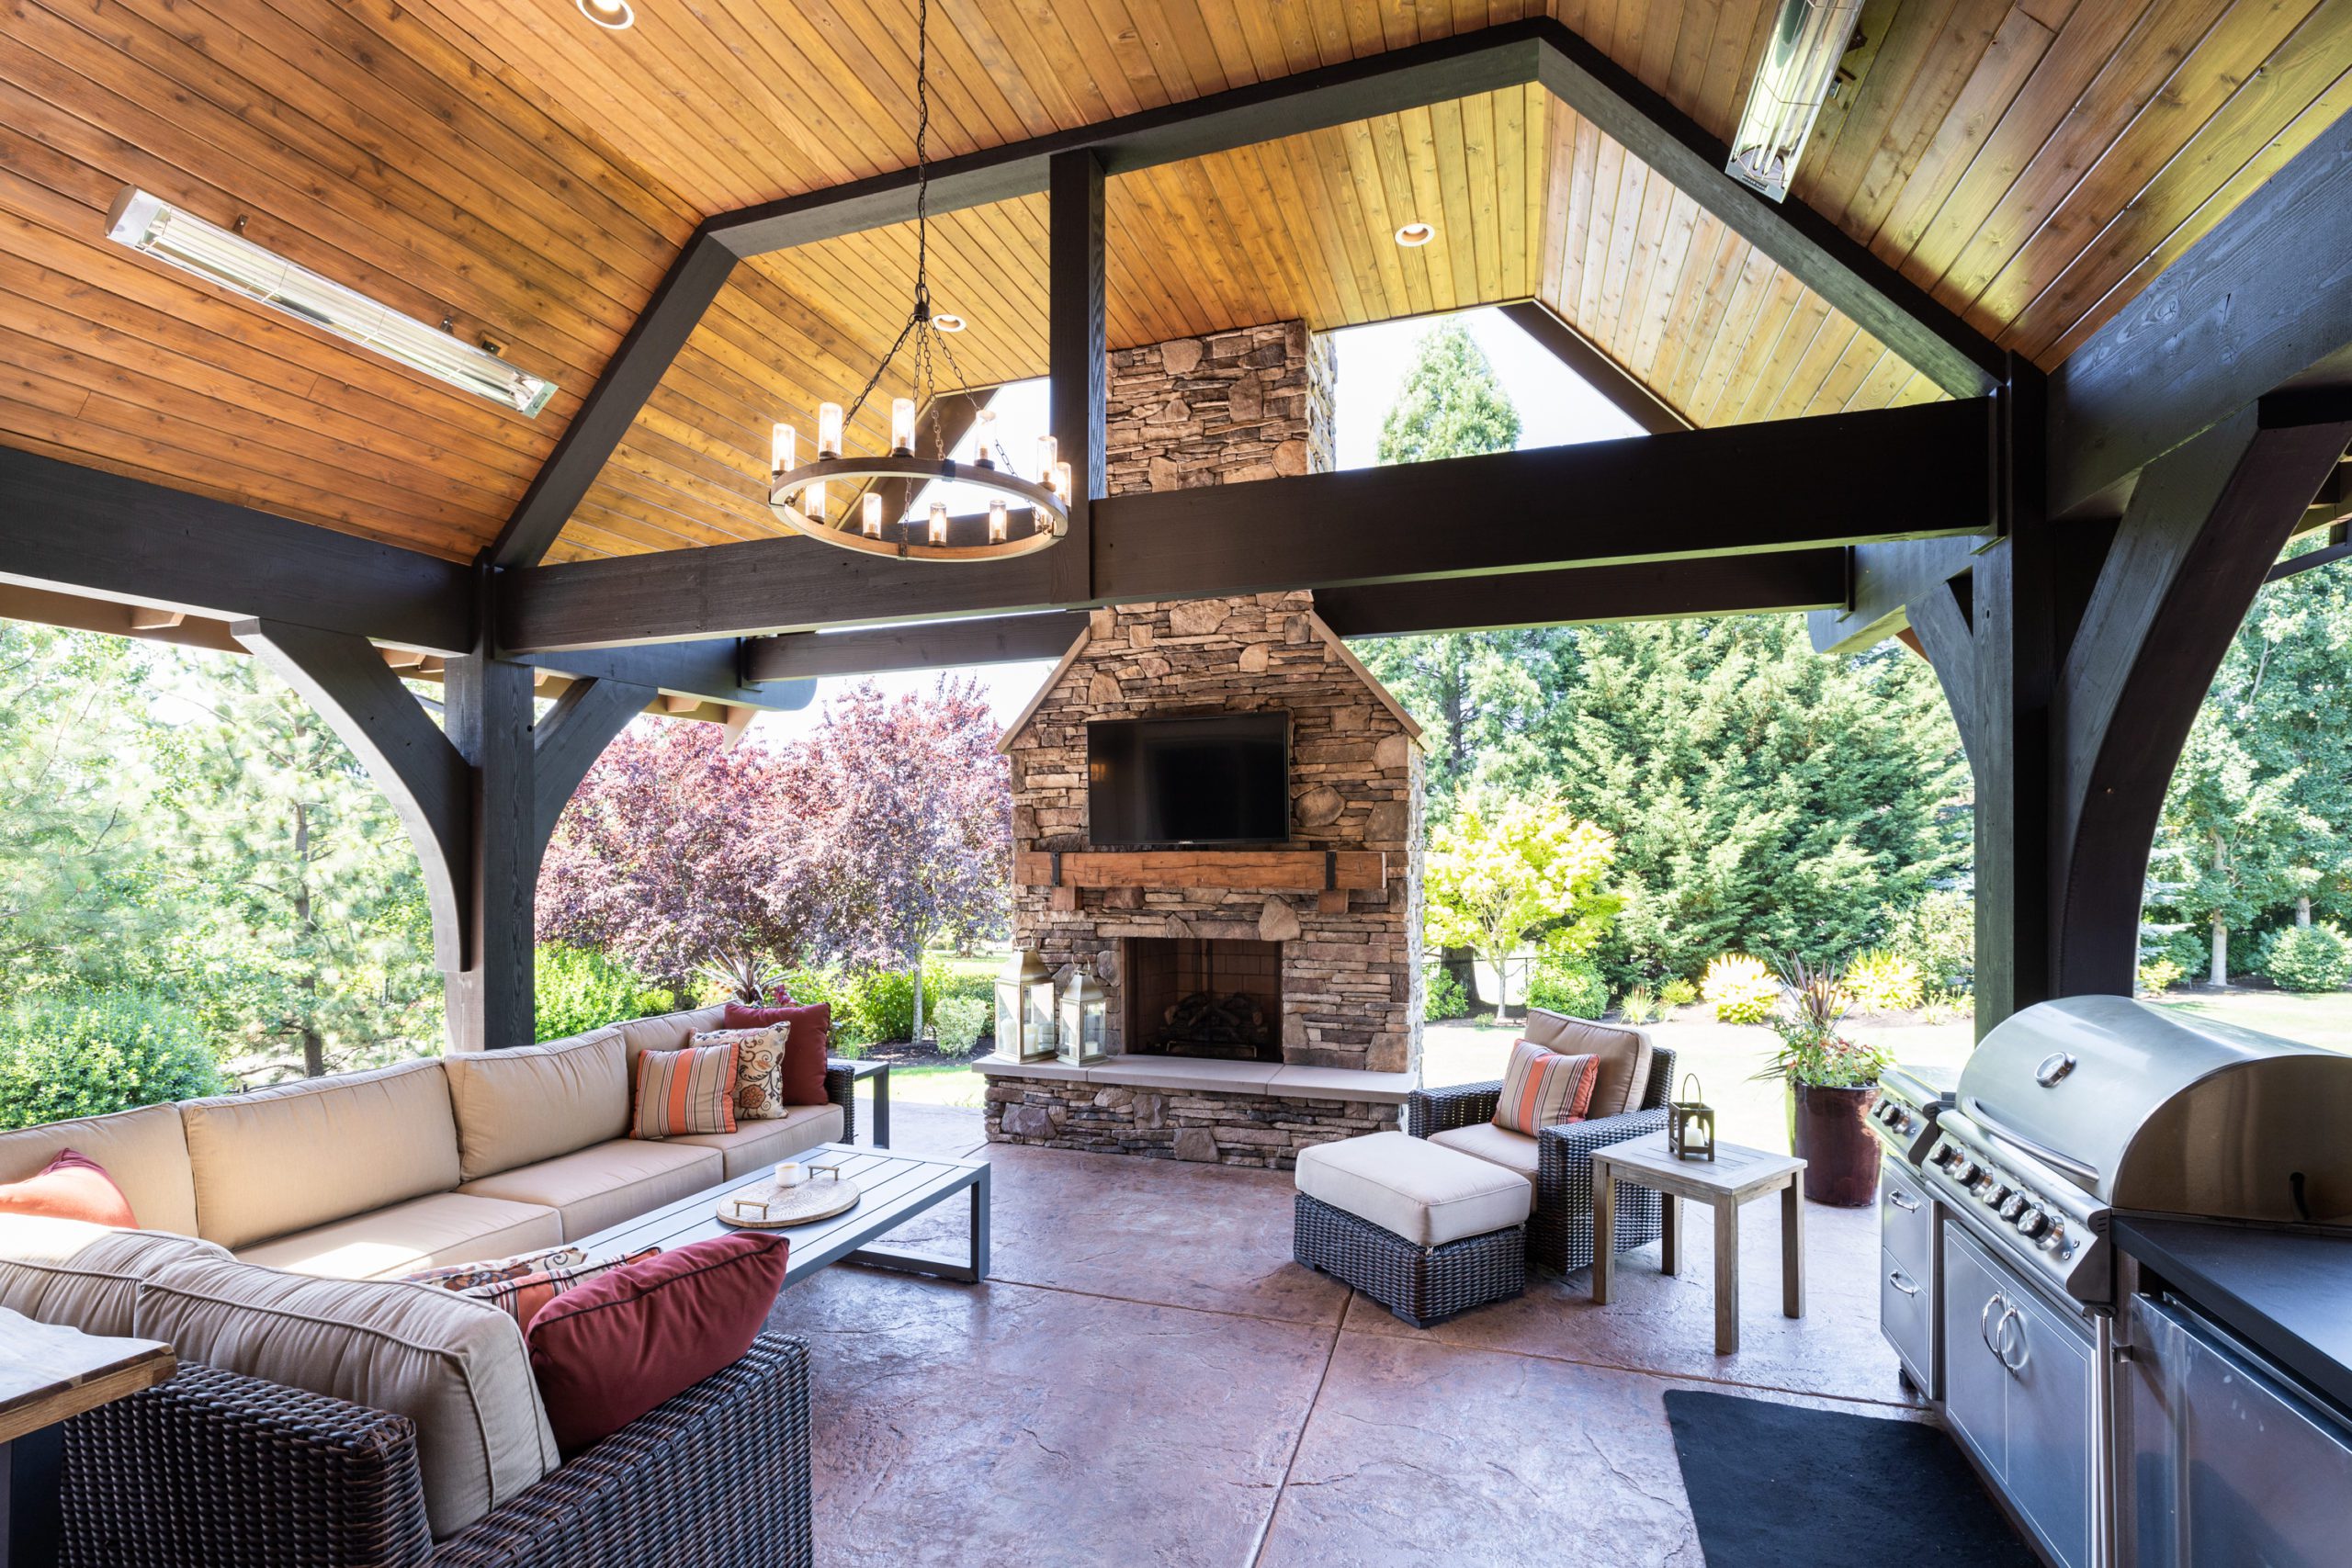 Indoor-Outdoor Living, Outdoor Kitchens, and Privacy Are Top